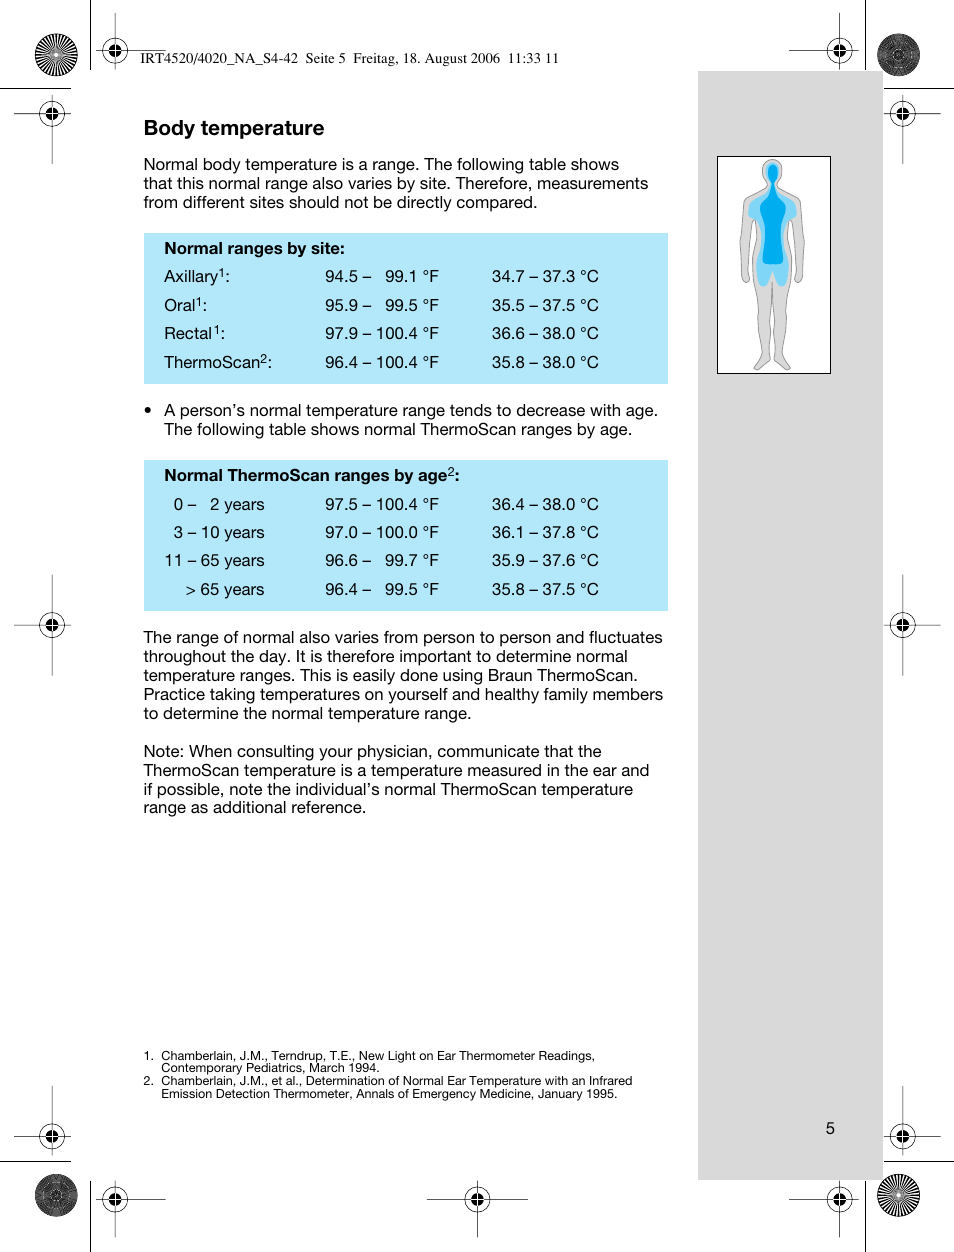 Braun Ear Thermometer Fever Chart